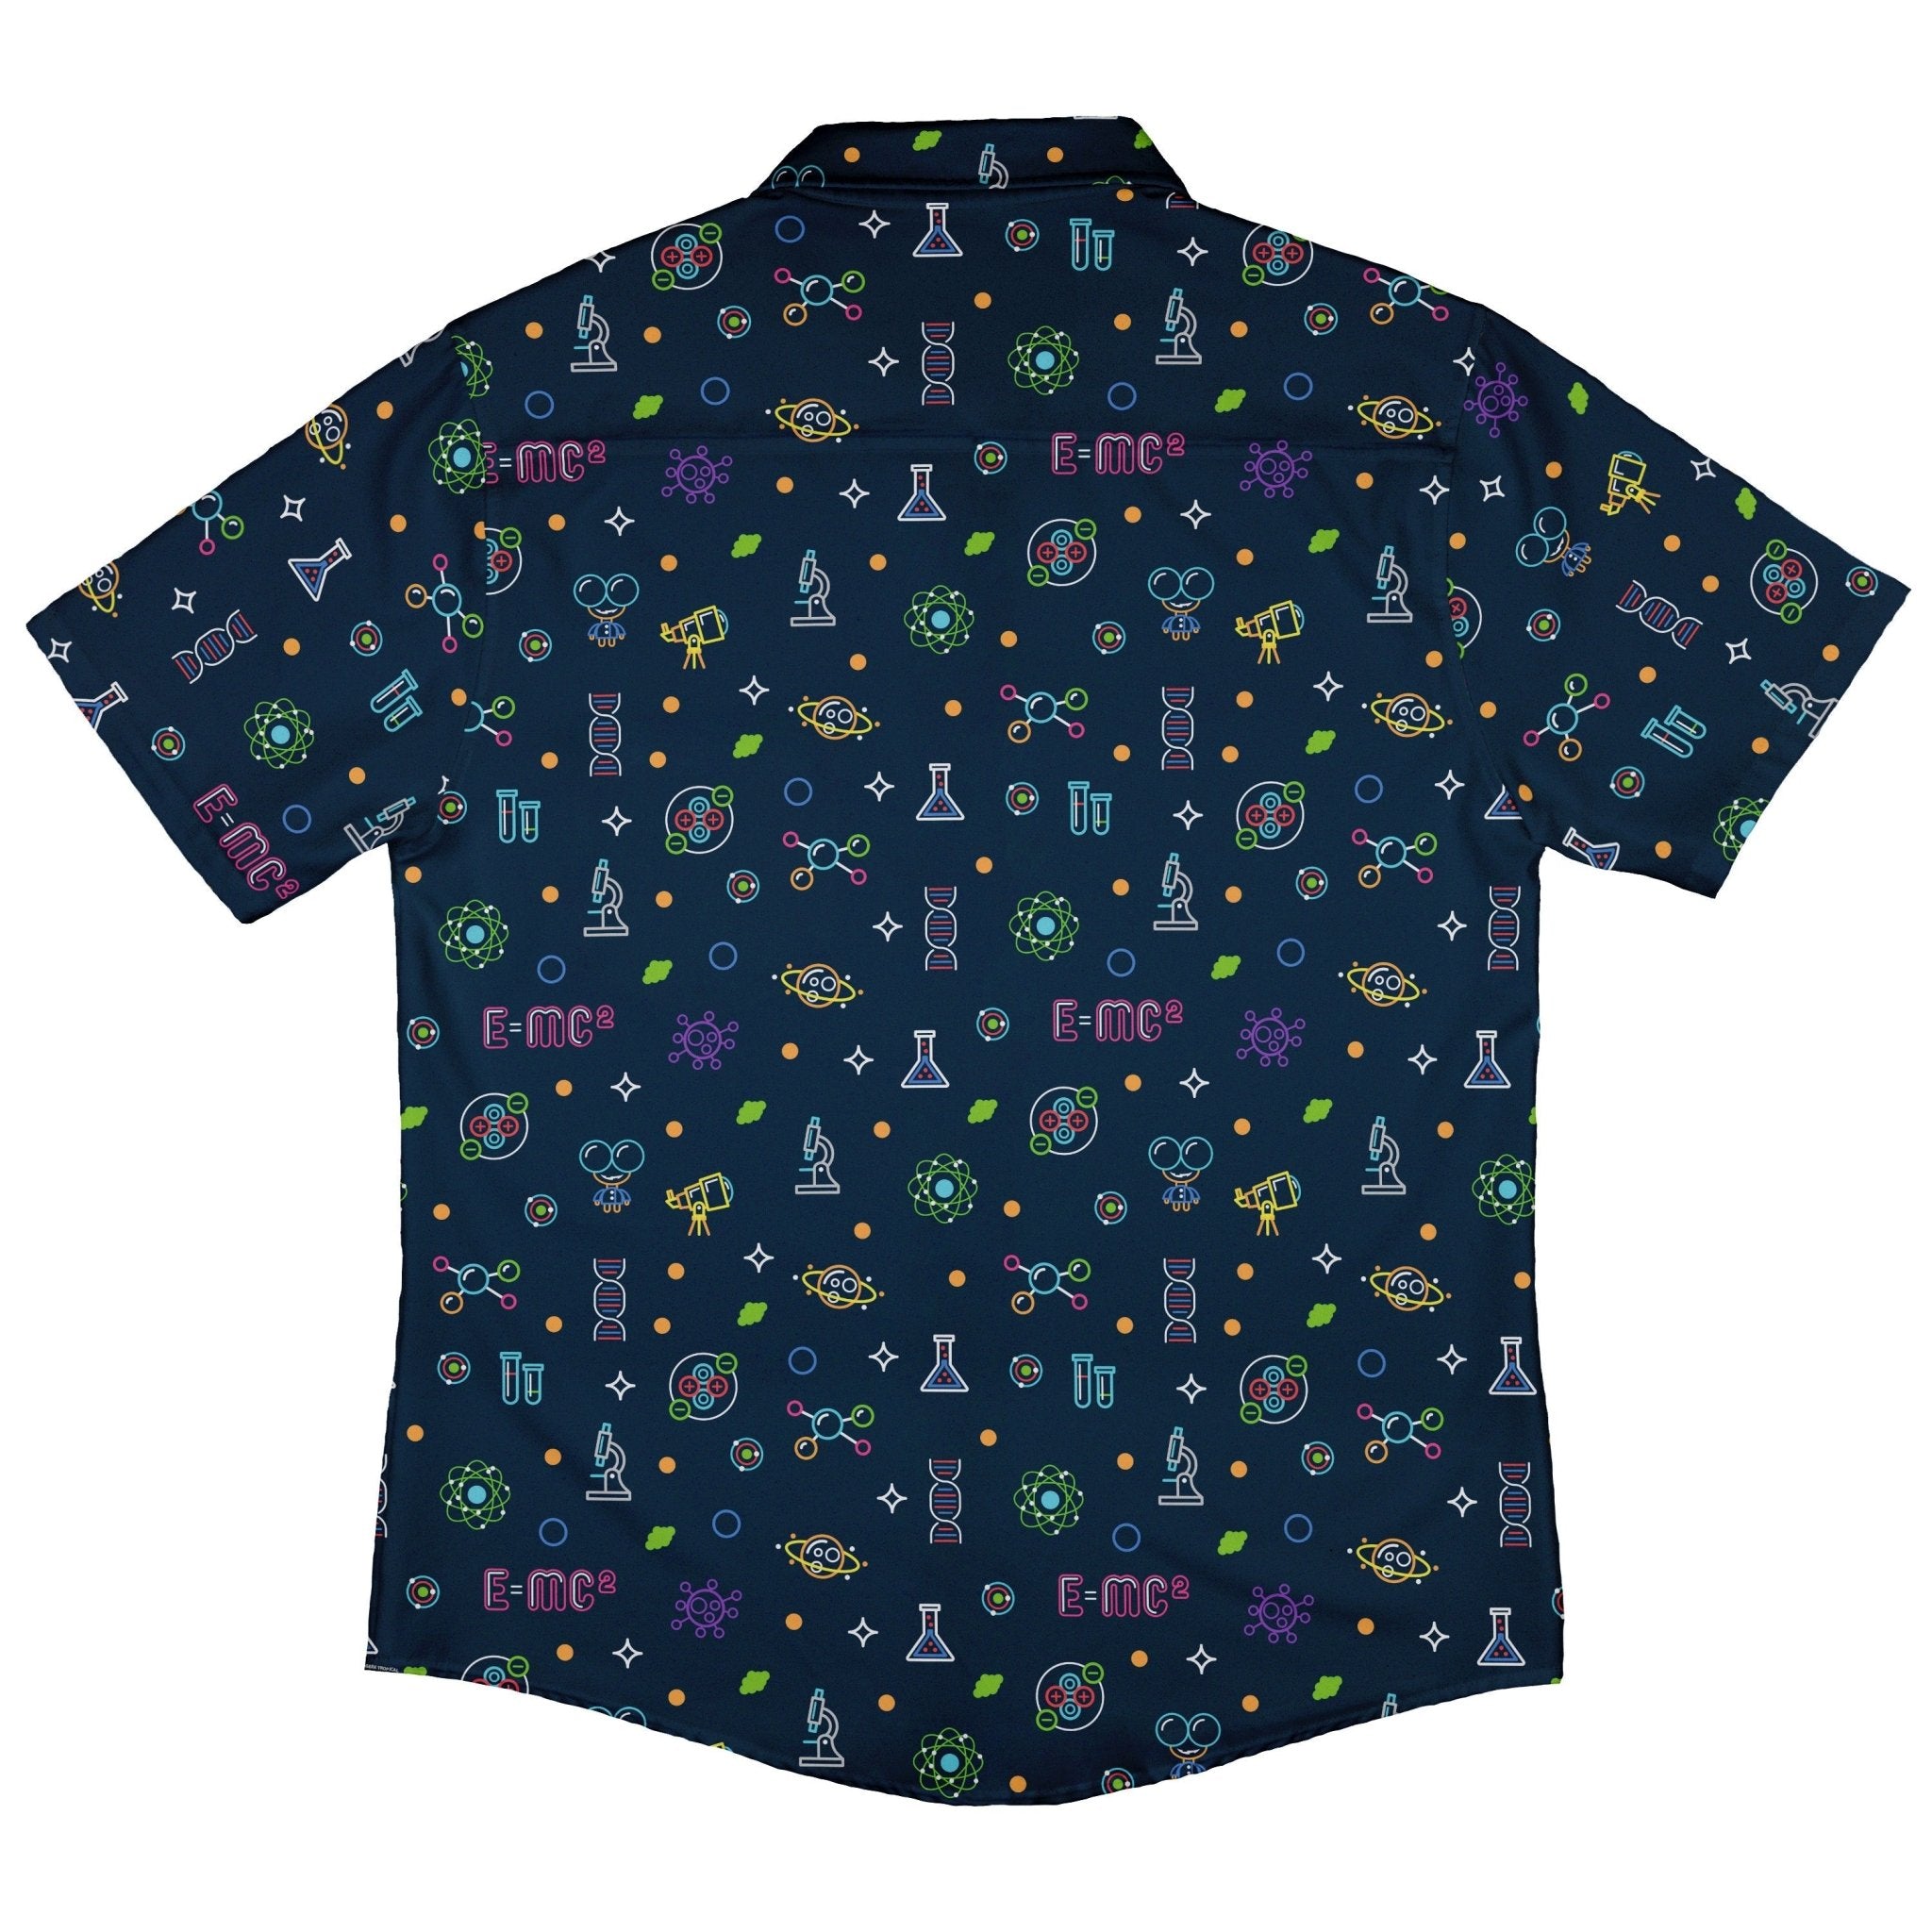 Science DNA Molecules Dark Navy Button Up Shirt - adult sizing - science print -